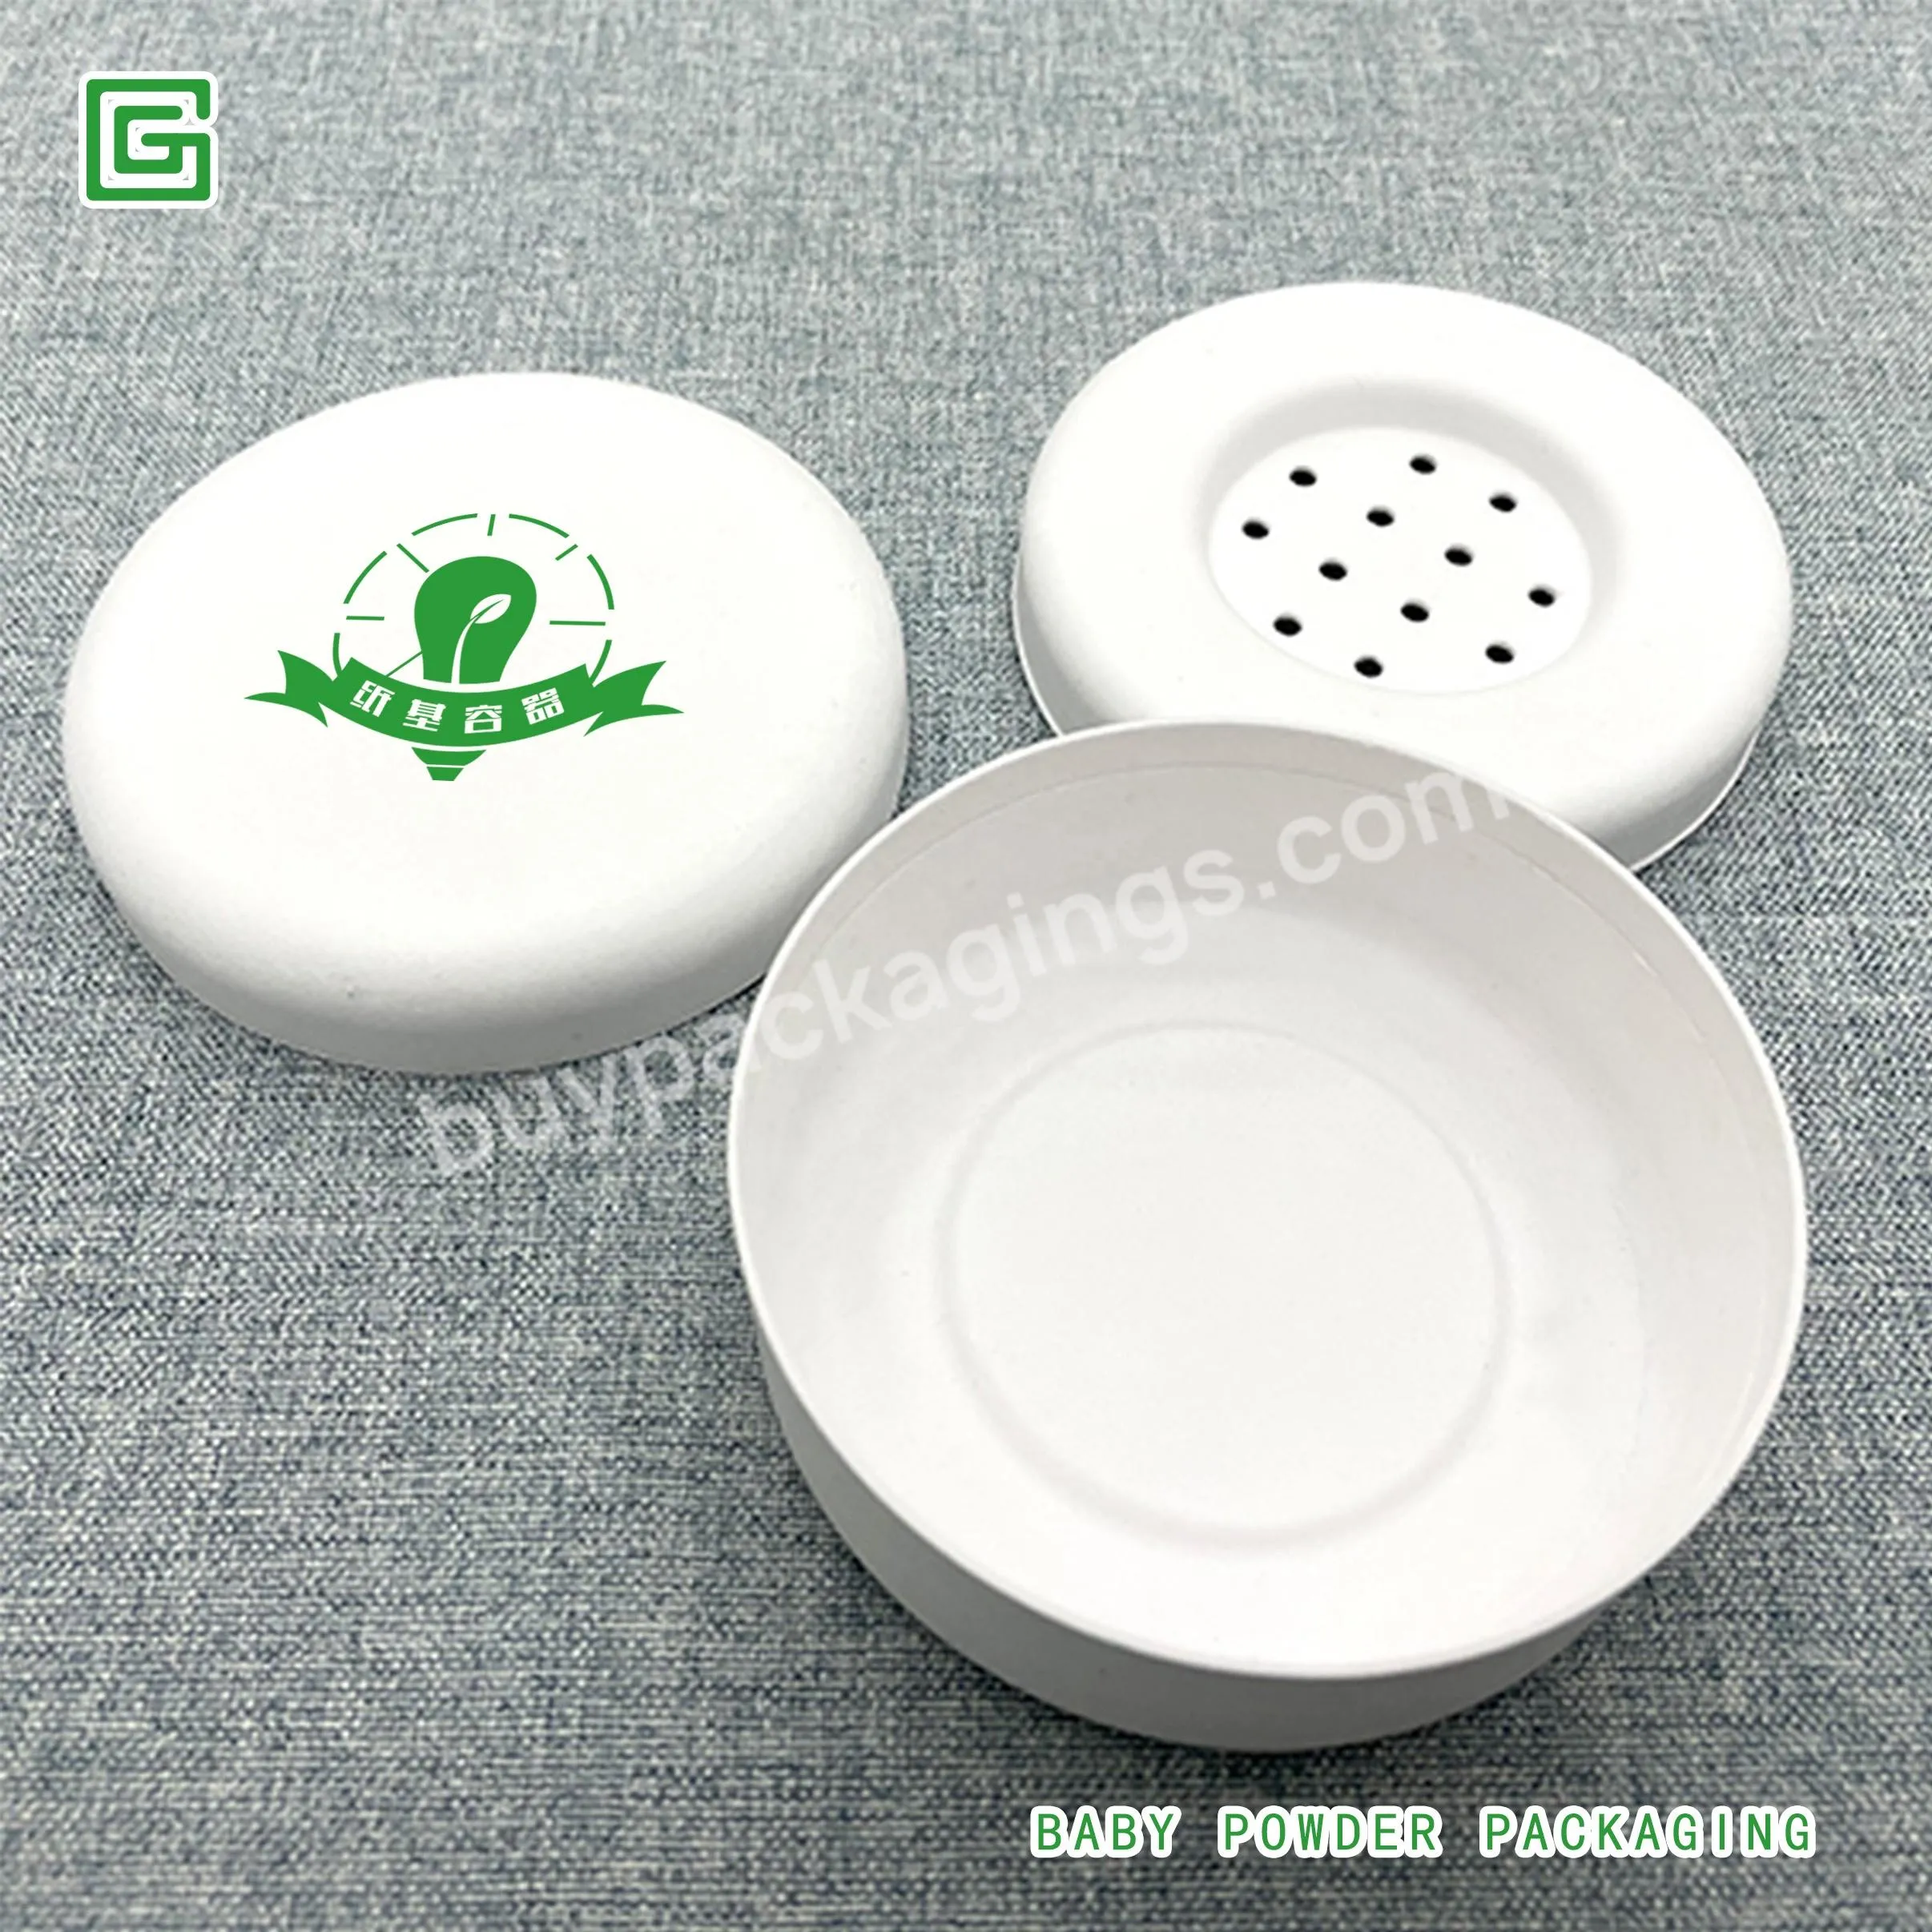 New High Quality Custom Recyclable Bamboo Baby Powder Molded Pulp Packaging For Personal Care - Buy Bamboo Molded Pulp Packaging Paper Box,Molded Pulp Packaging Recyclable,Molded Pulp Paper Packaging.